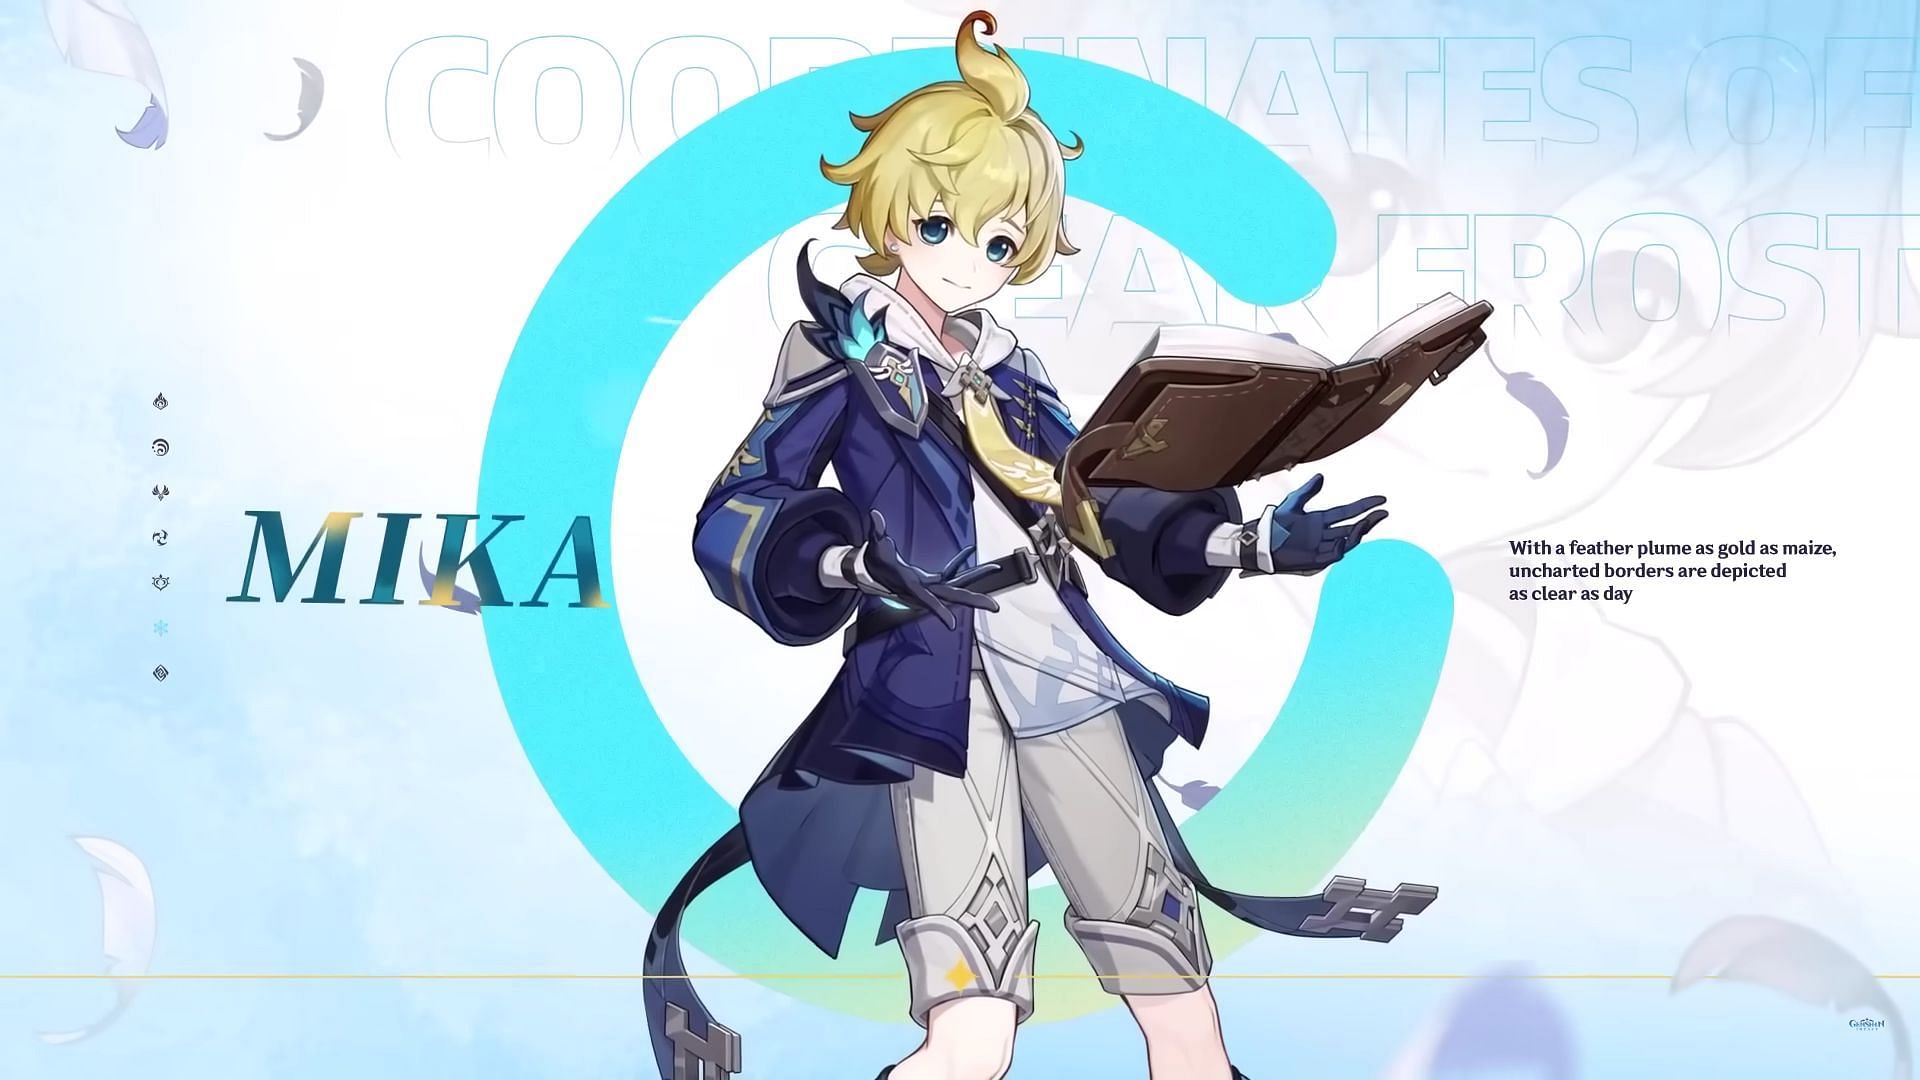 Mika is a new 4-star character (Image via HoYoverse)